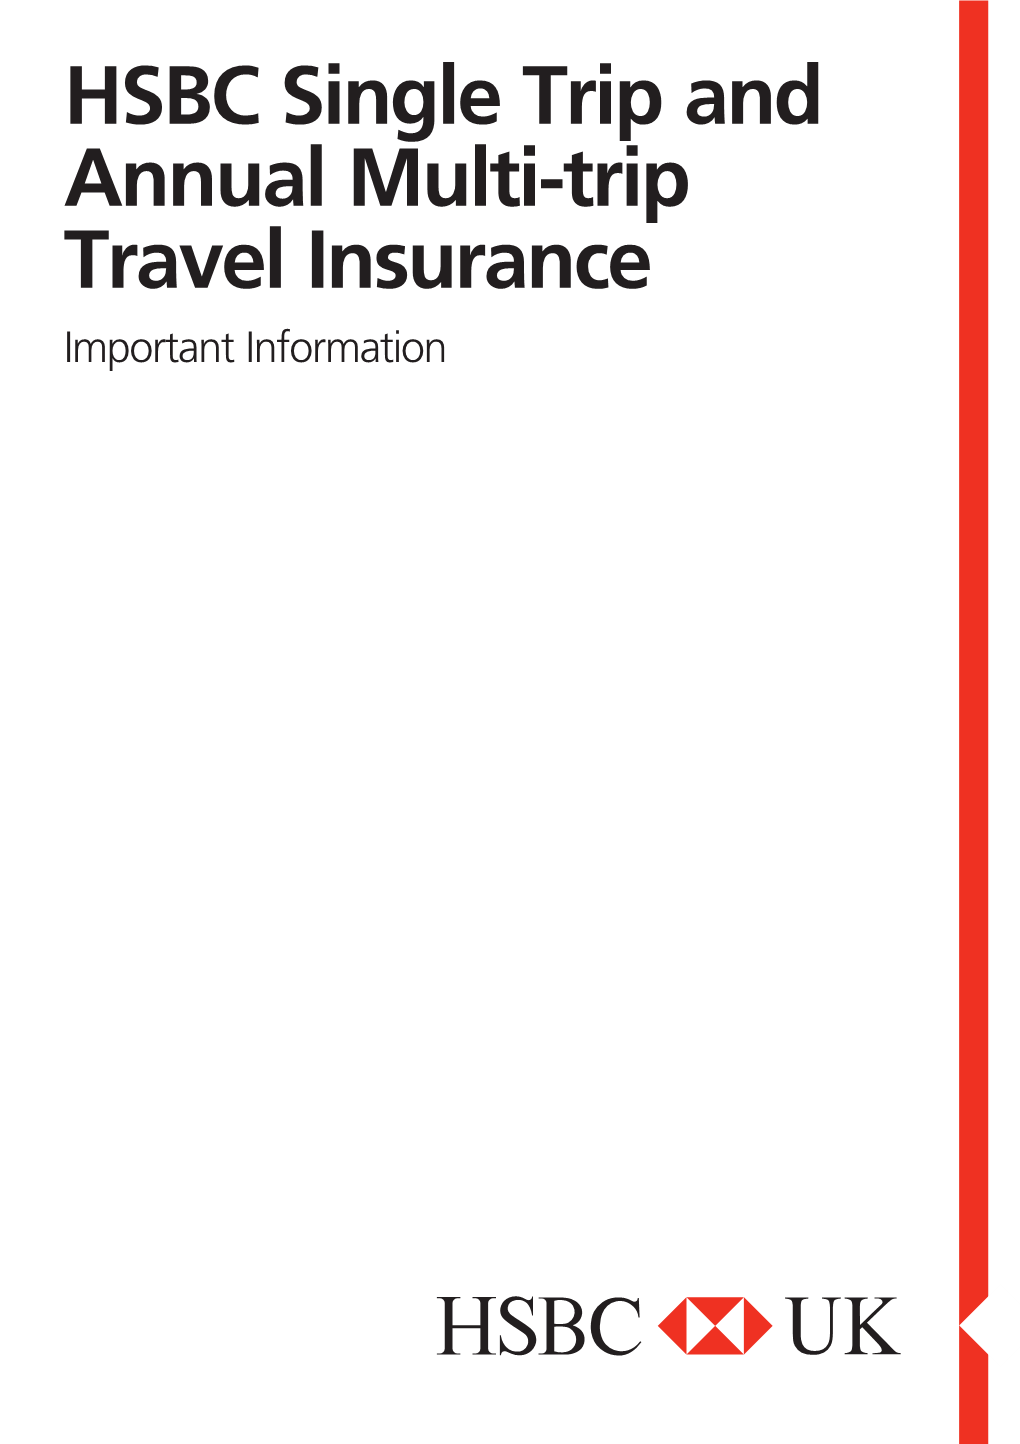 HSBC Single Trip and Annual Multi-Trip Travel Insurance Important Information